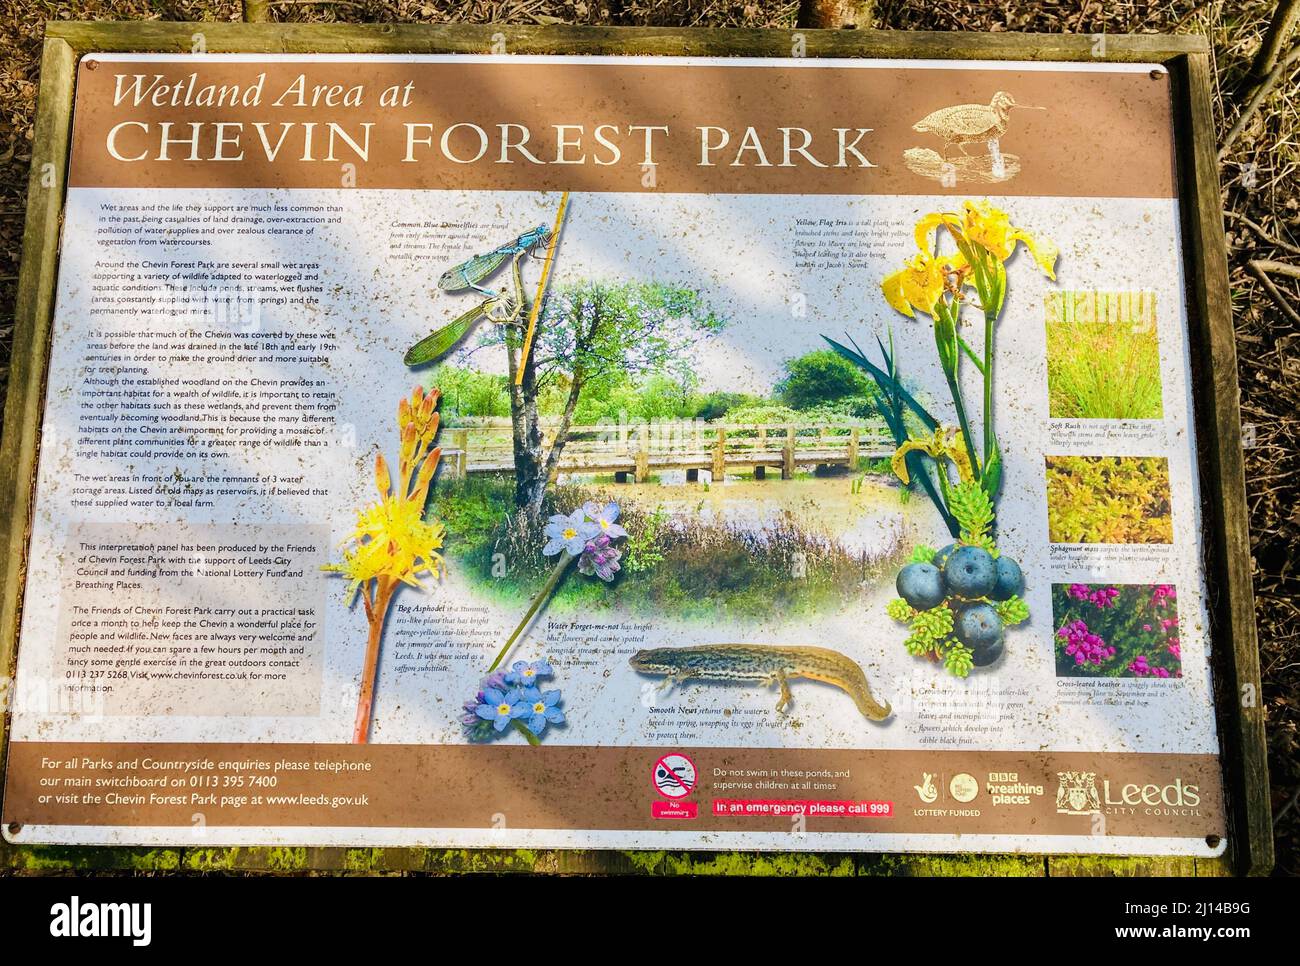 Information display board depicting the wildlife of Chevin Forest Park Wetland Area, a local nature reserve and conservation area in West Yorkshire. Stock Photo